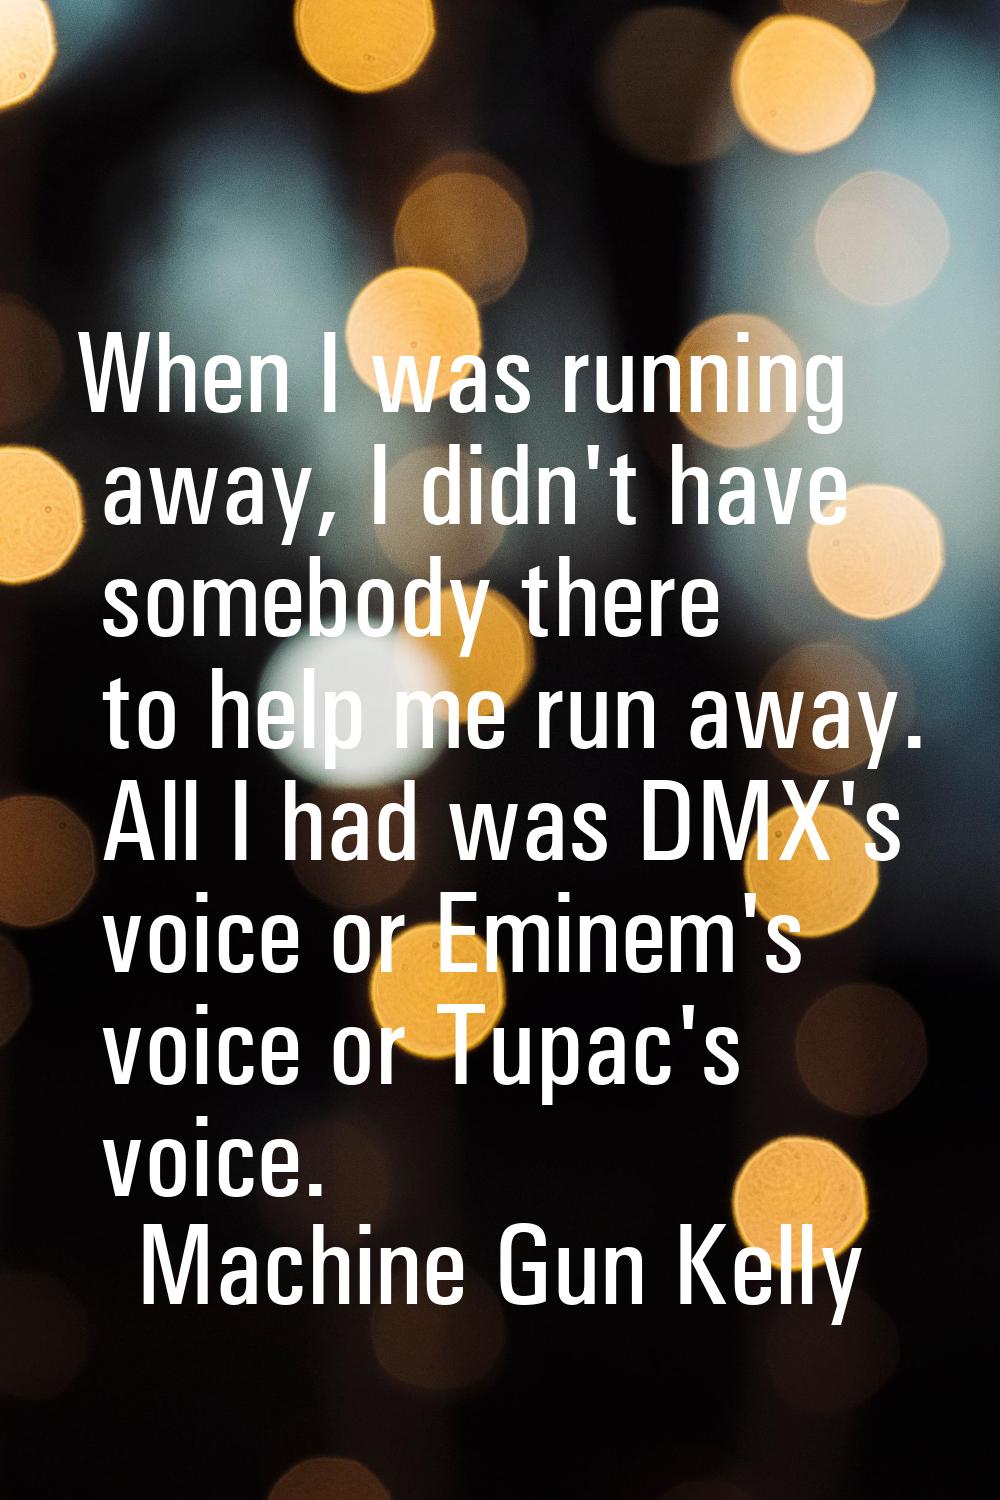 When I was running away, I didn't have somebody there to help me run away. All I had was DMX's voic